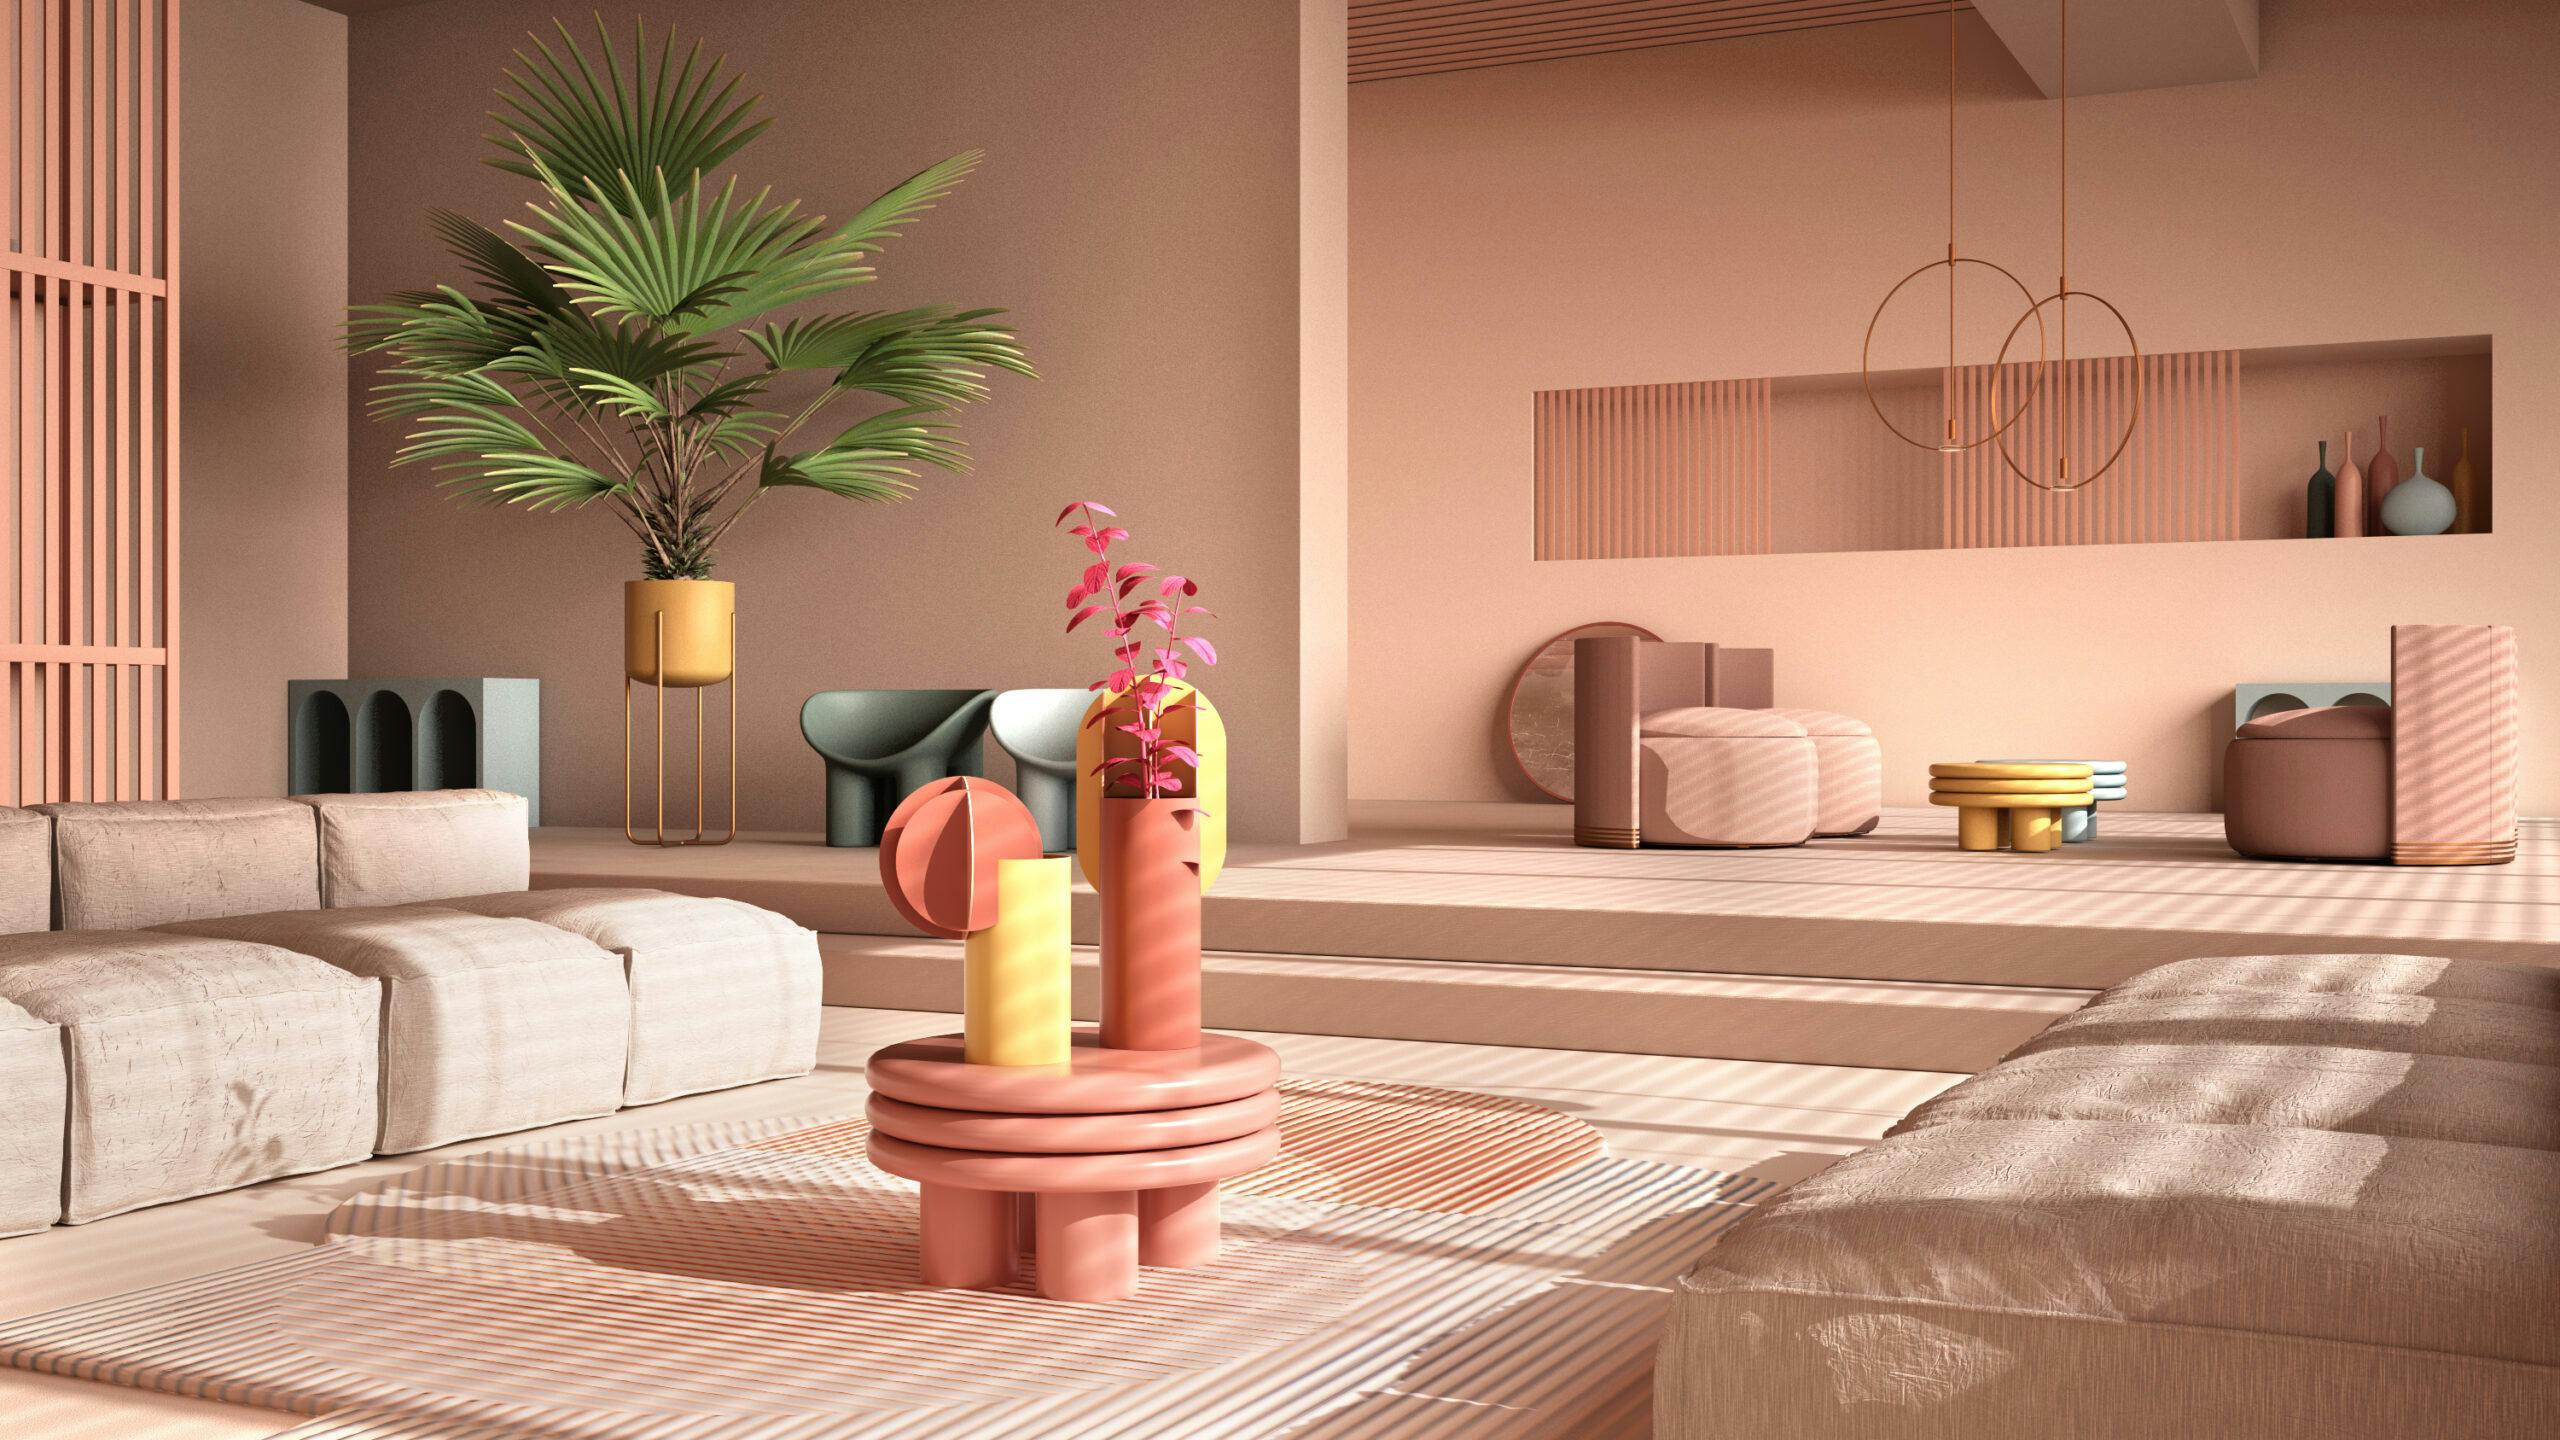 Colored contemporary living room, pastel rosy colors, sofa, armchair, carpet, tables, steps and potted plants, copper pendant lamps. Interior design atmosphere, architecture idea